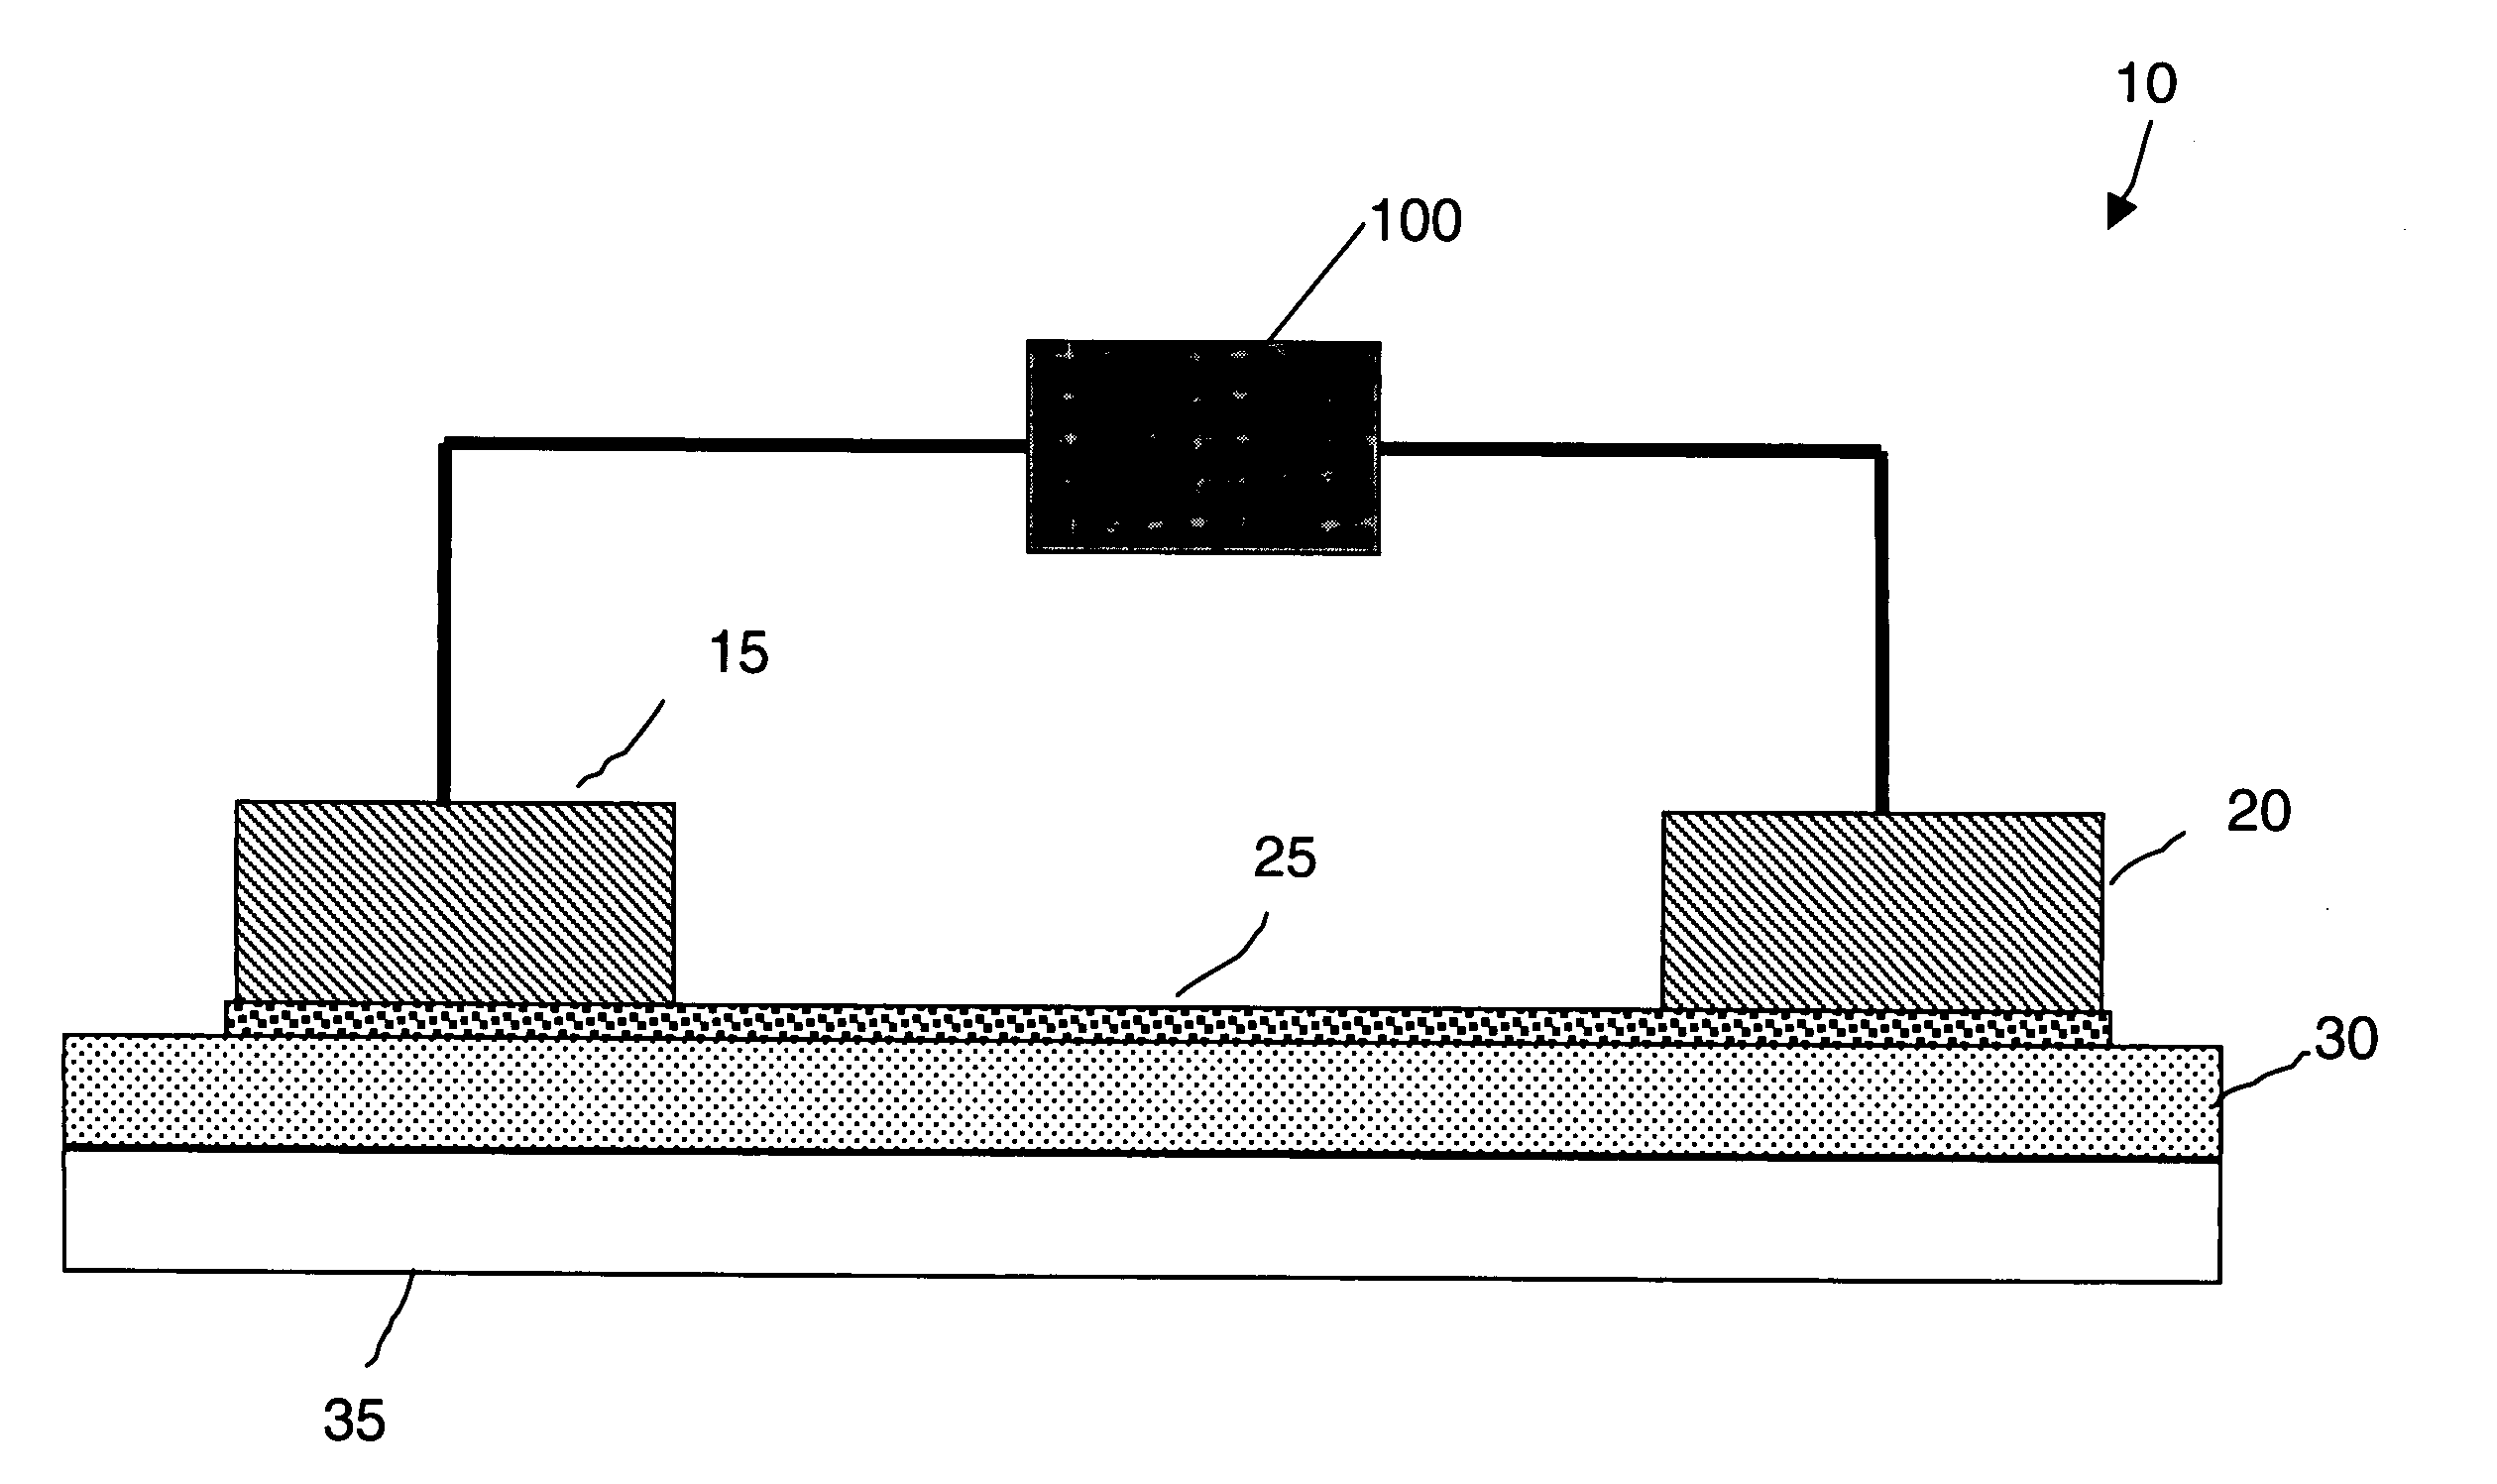 Two-terminal nanotube devices and systems and methods of making same